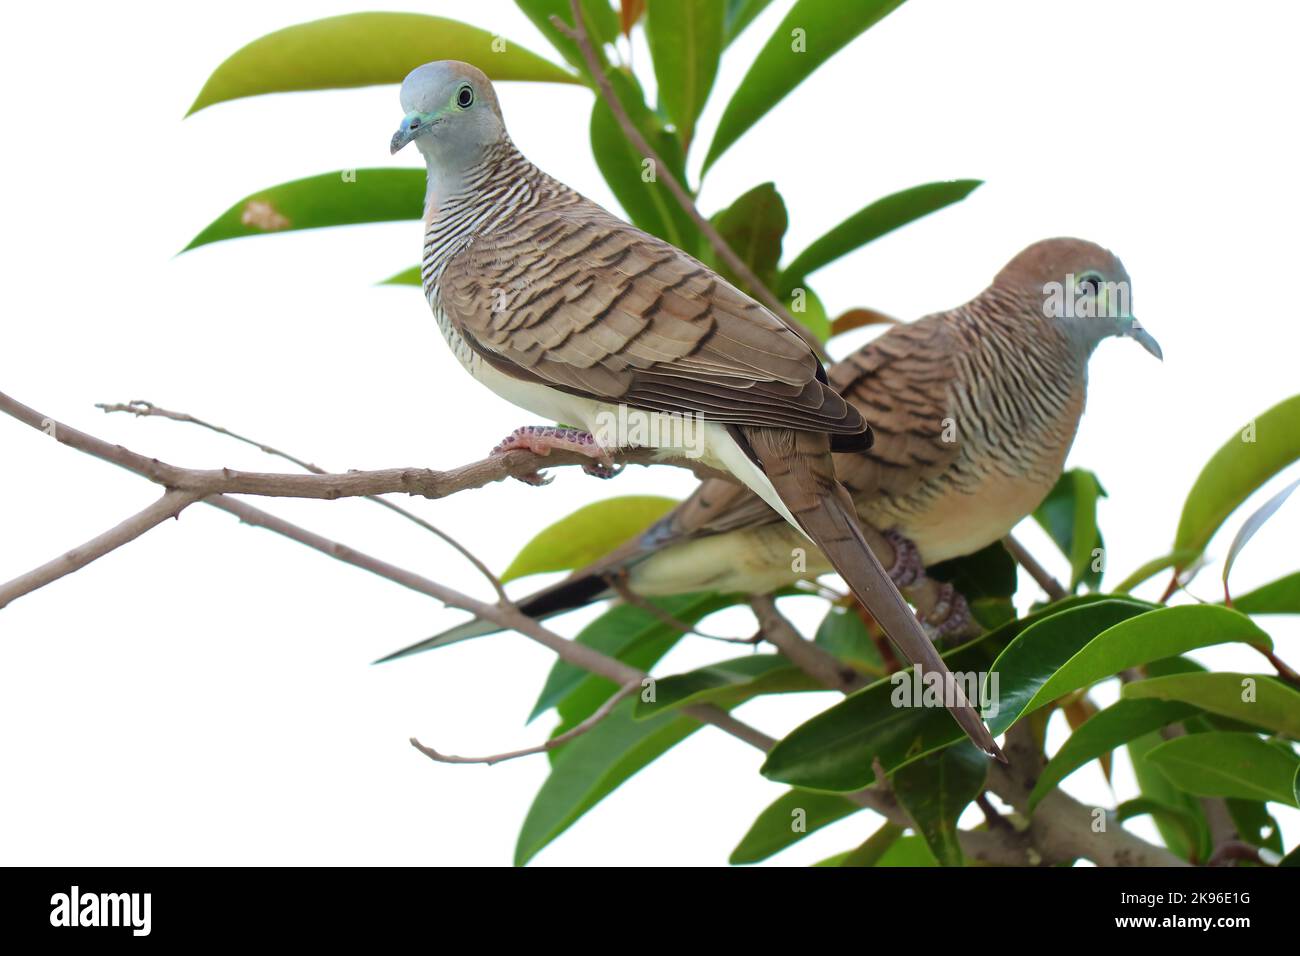 Closeup of Two Wild Zebra Doves Relaxing on Houseplant Branches Stock Photo